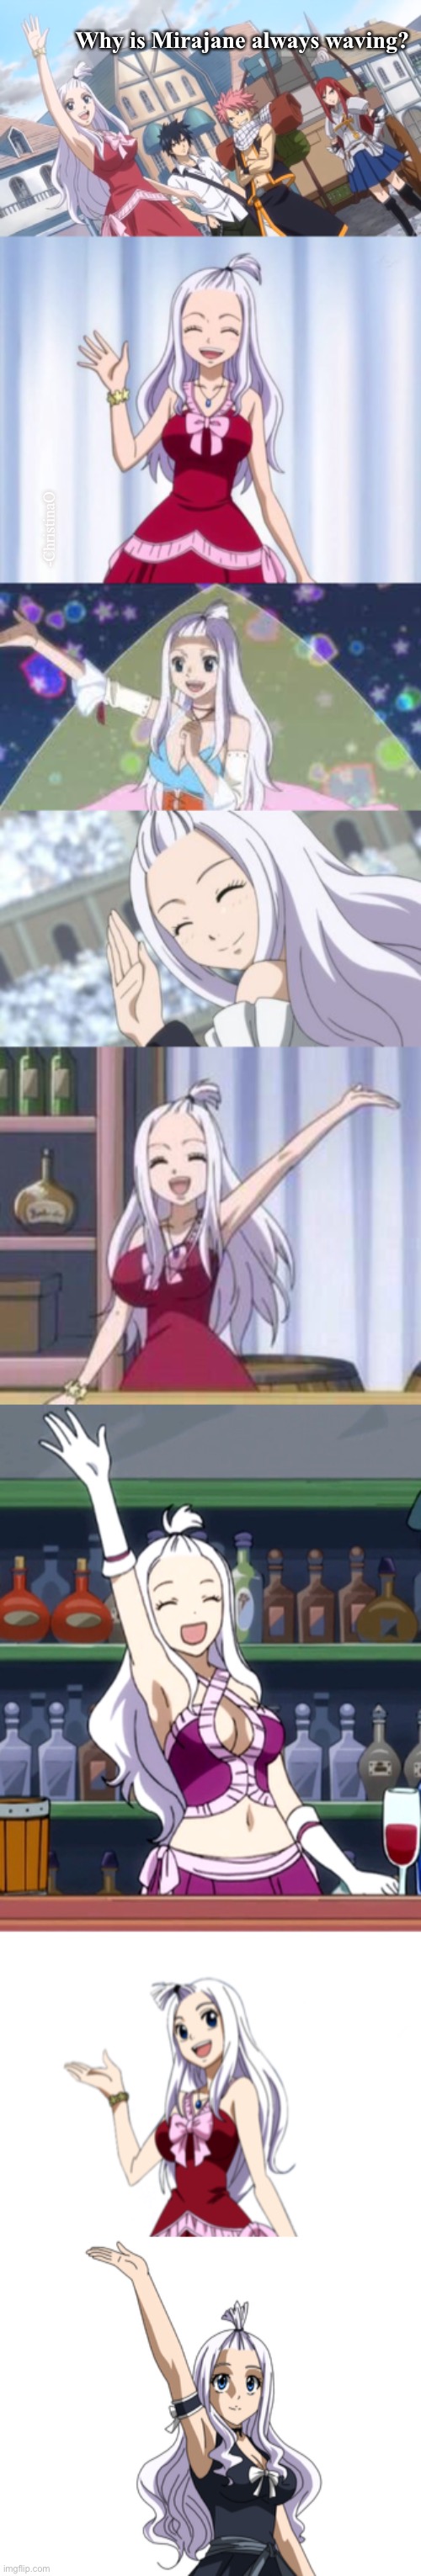 Mirajane waving | Why is Mirajane always waving? -ChristinaO | image tagged in fairy tail,fairy tail meme,fairy tail guild,mirajane,mirajane strauss,edolas | made w/ Imgflip meme maker